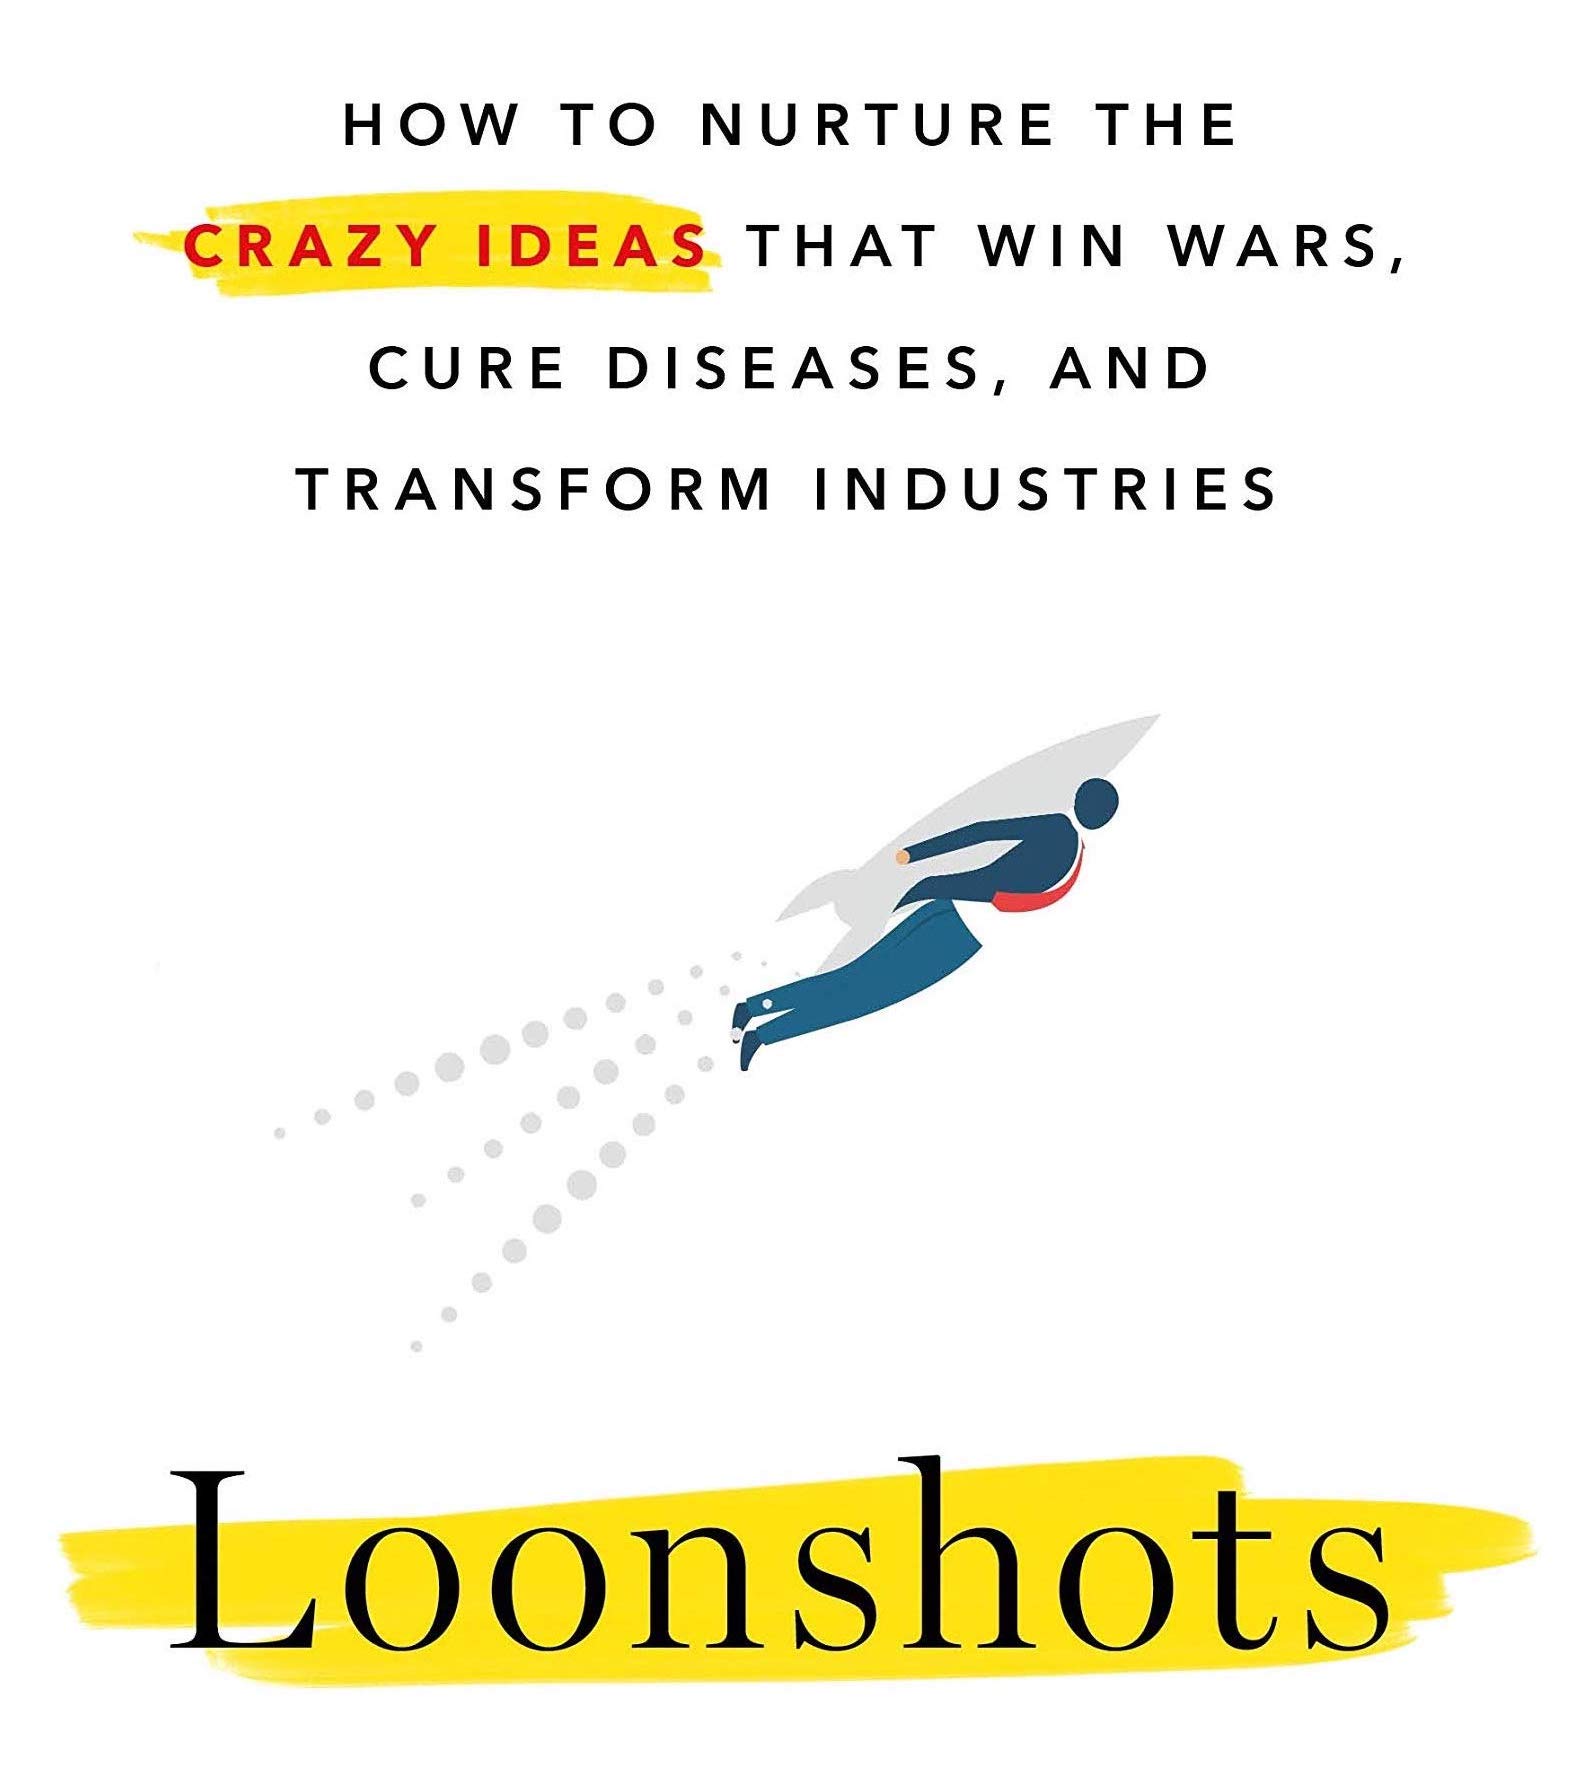 Loonshots: How to Nurture Crazy Ideas That Win Wars, Cure Diseases, and Transform Industries